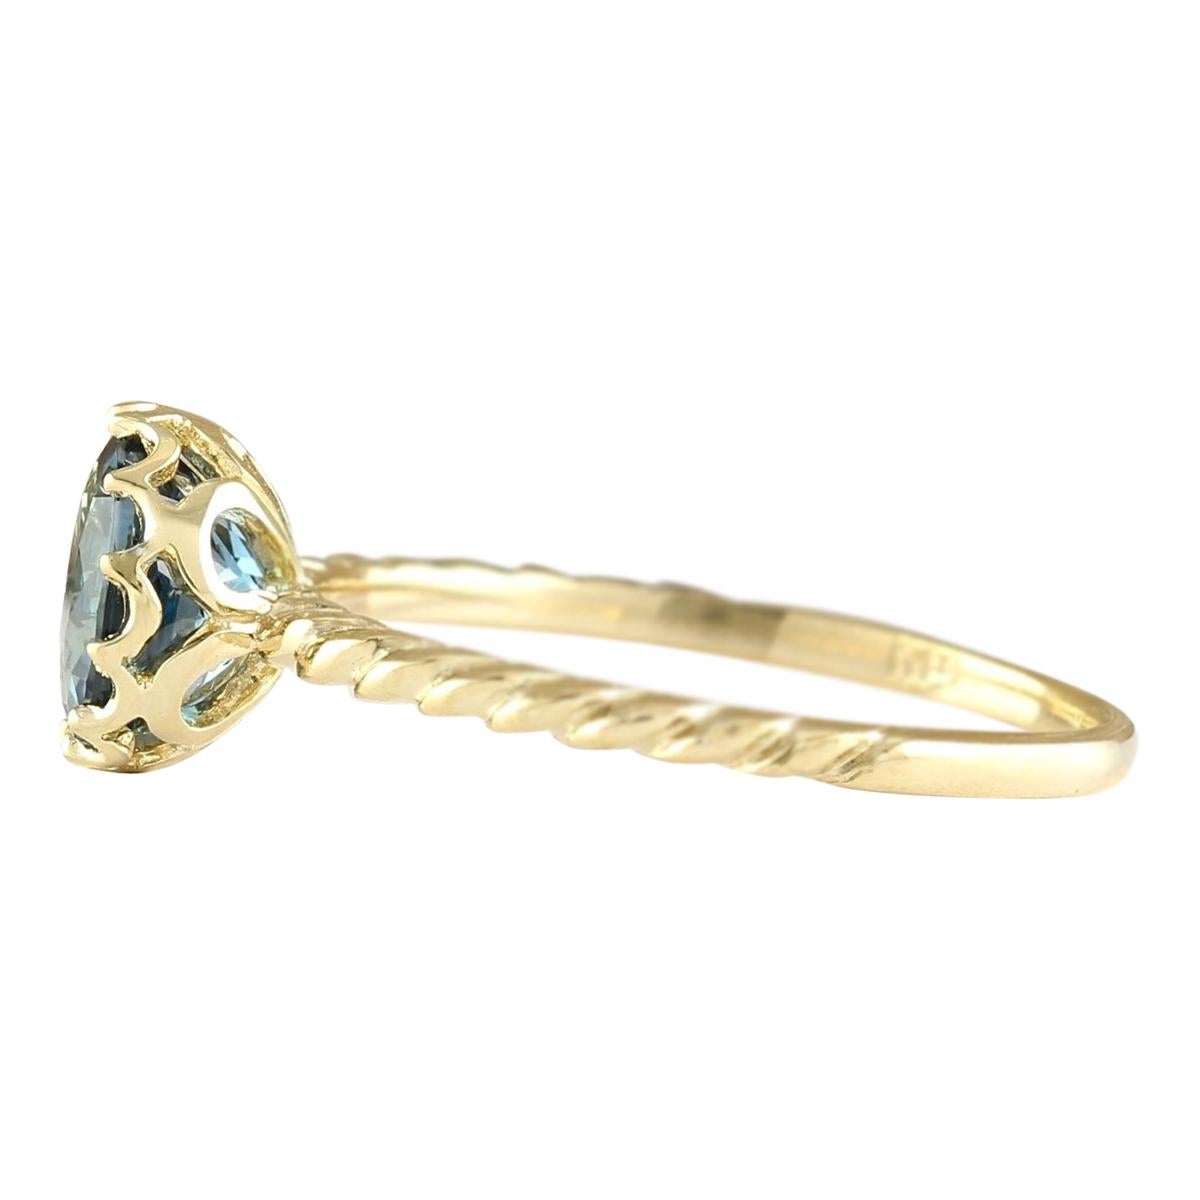 Stamped: 14K Yellow Gold
Total Ring Weight: 1.8 Grams
Total Natural Topaz Weight is 1.50 Carat
Color: London Blue
Face Measures: 8.00x8.00 mm
Sku: [703262W]